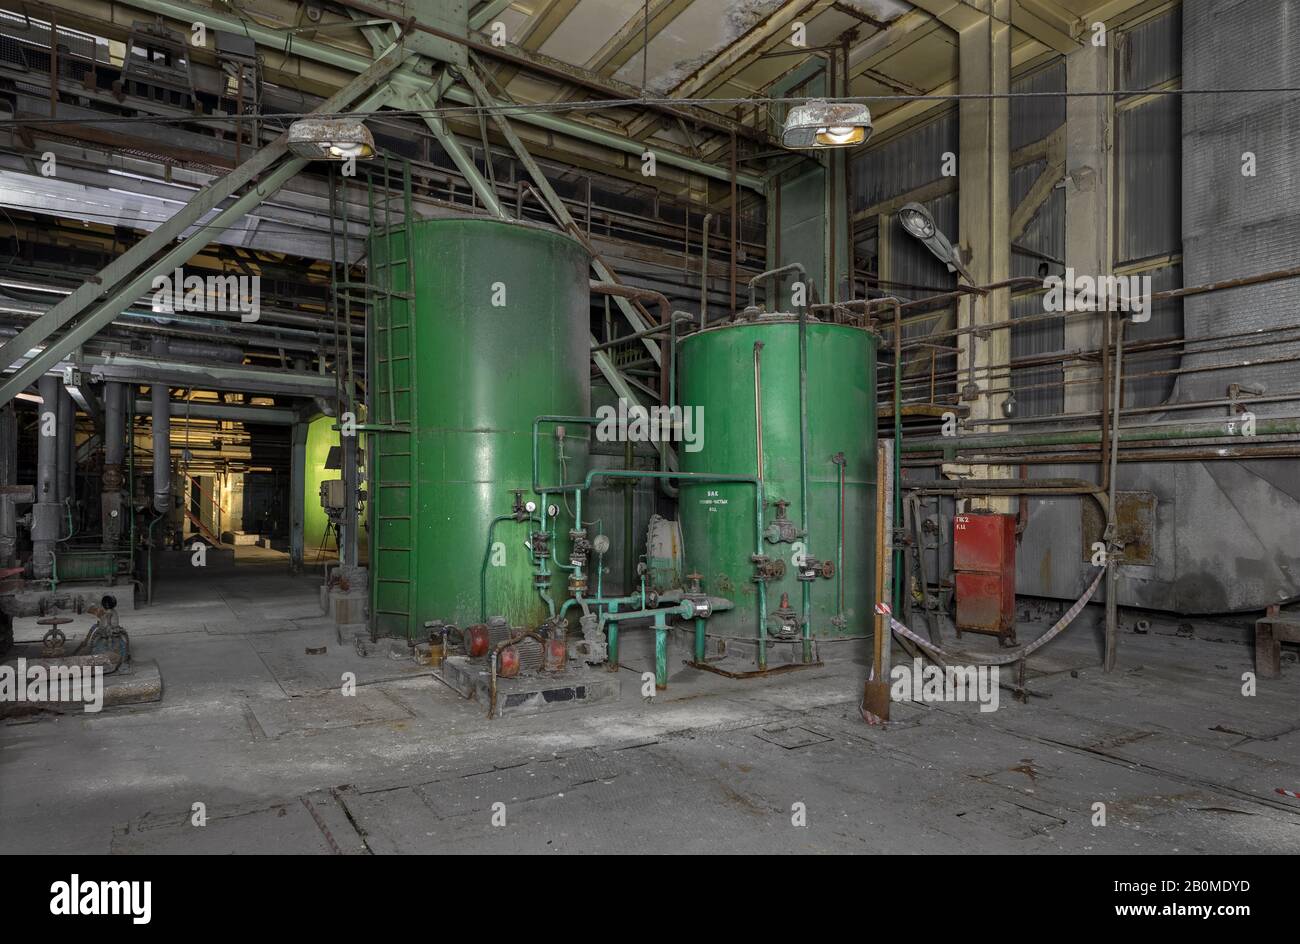 Large green tanks with secondary water at the plant Stock Photo